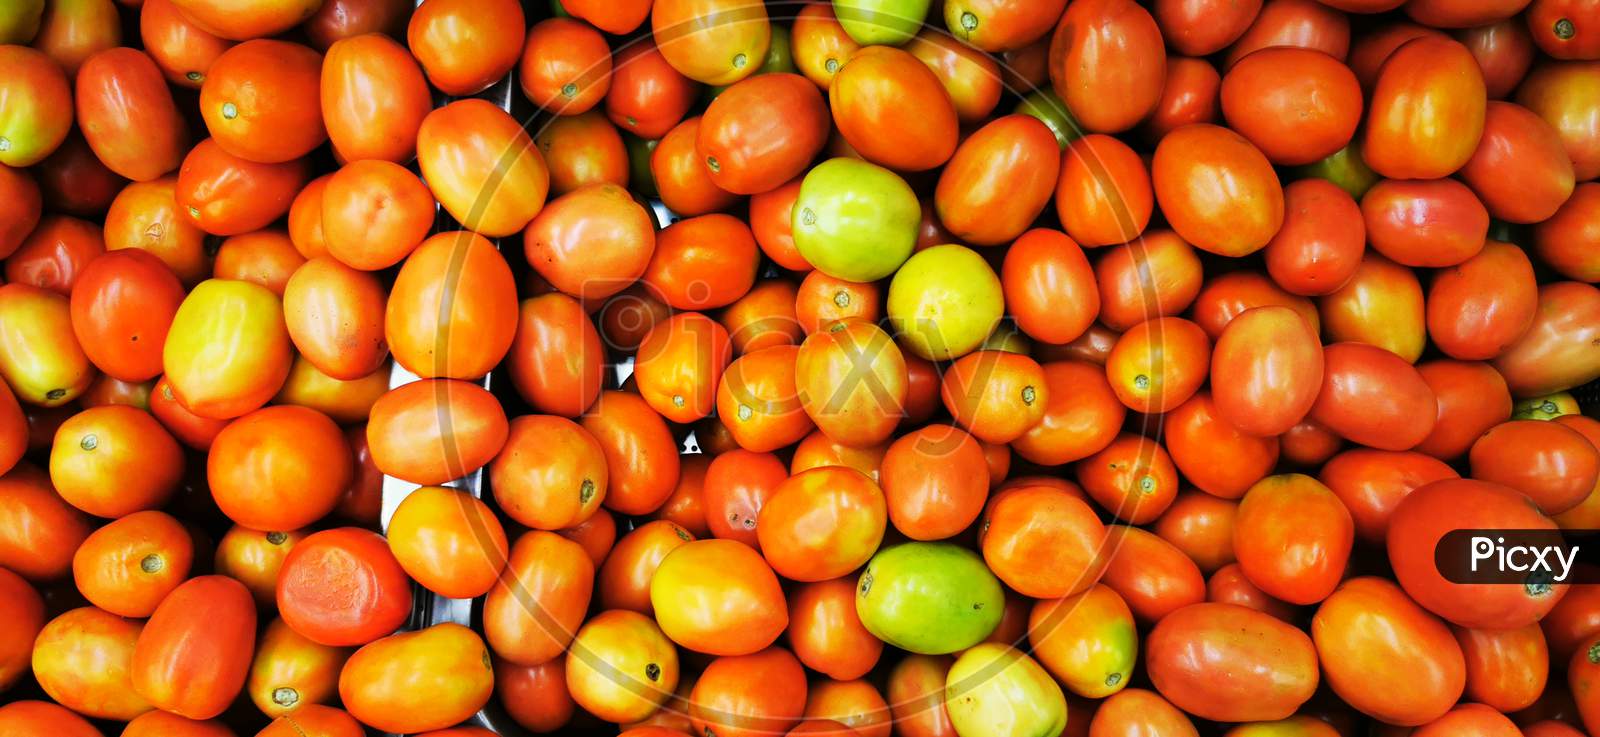 The tomato is the edible berry of the plant Solanum lycopersicum, commonly known as a tomato plant.